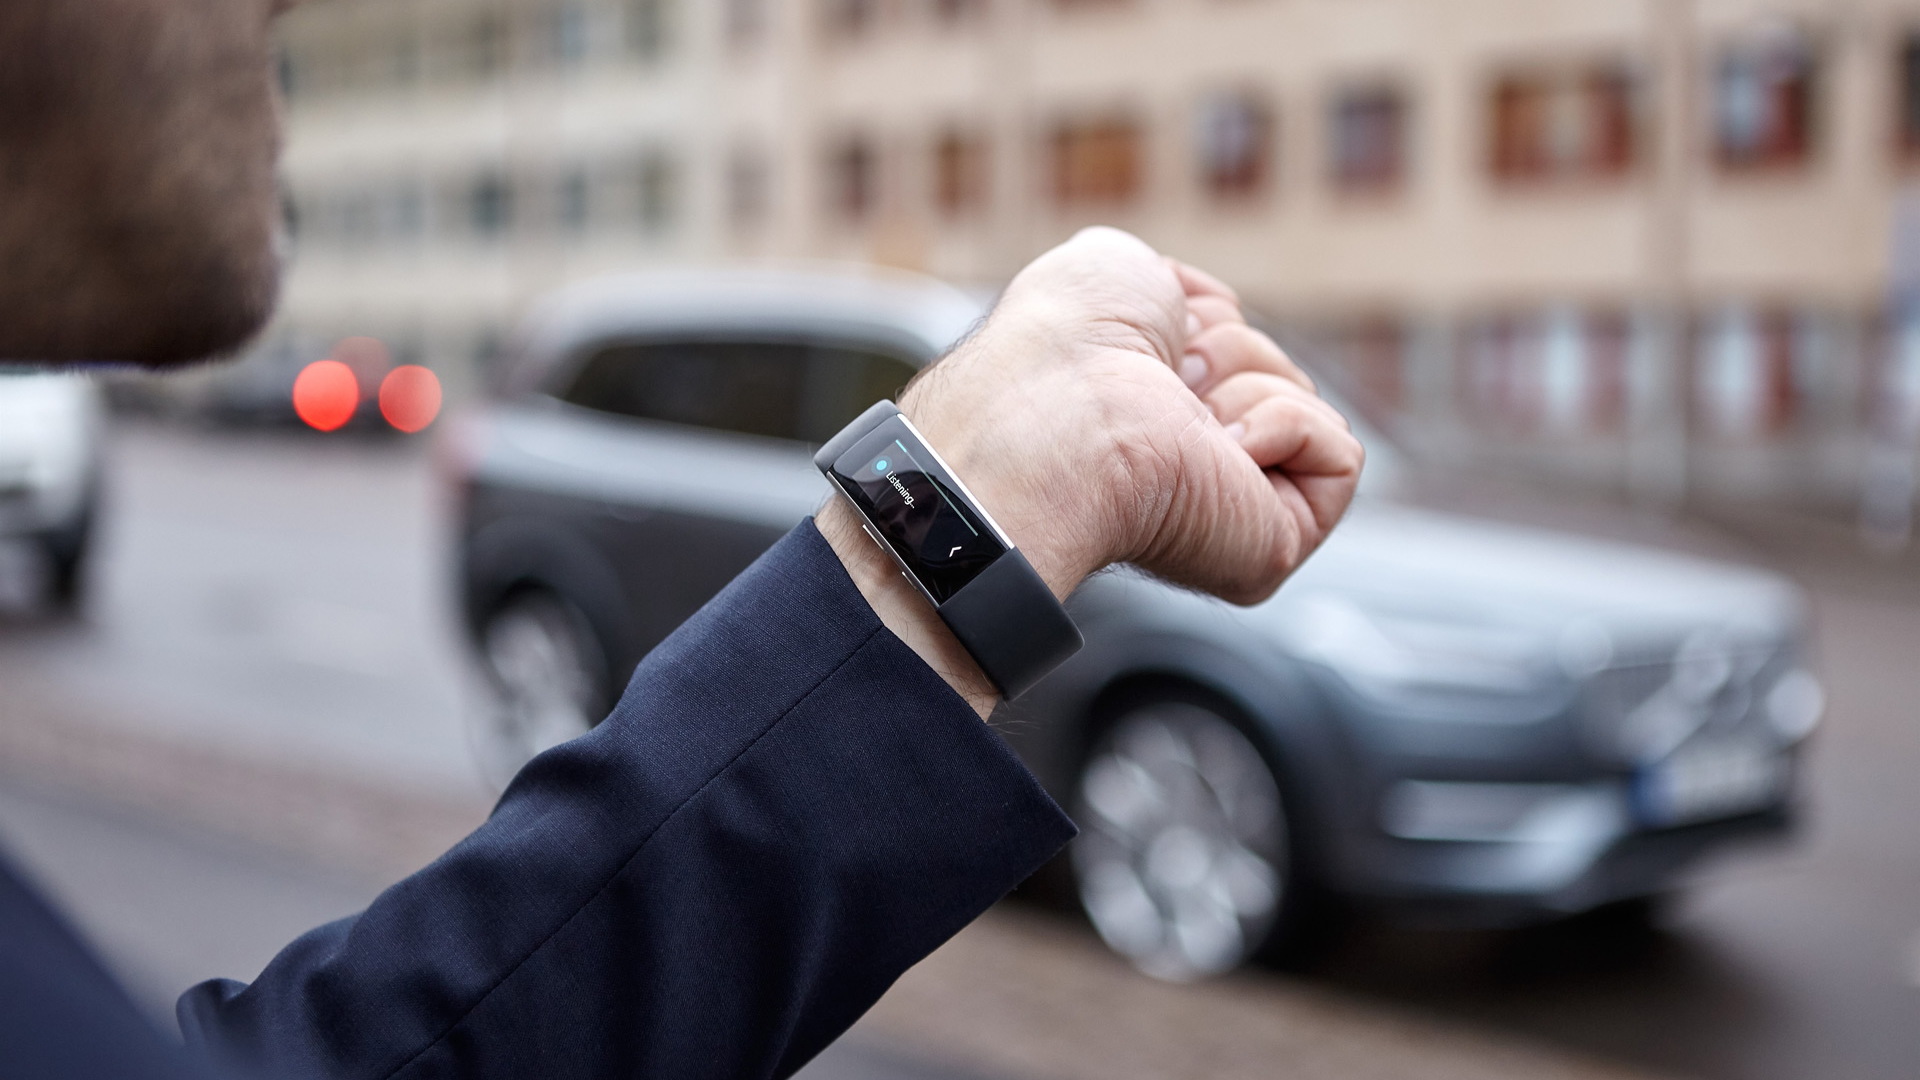 Volvo voice control with Microsoft Band 2 smartwatch